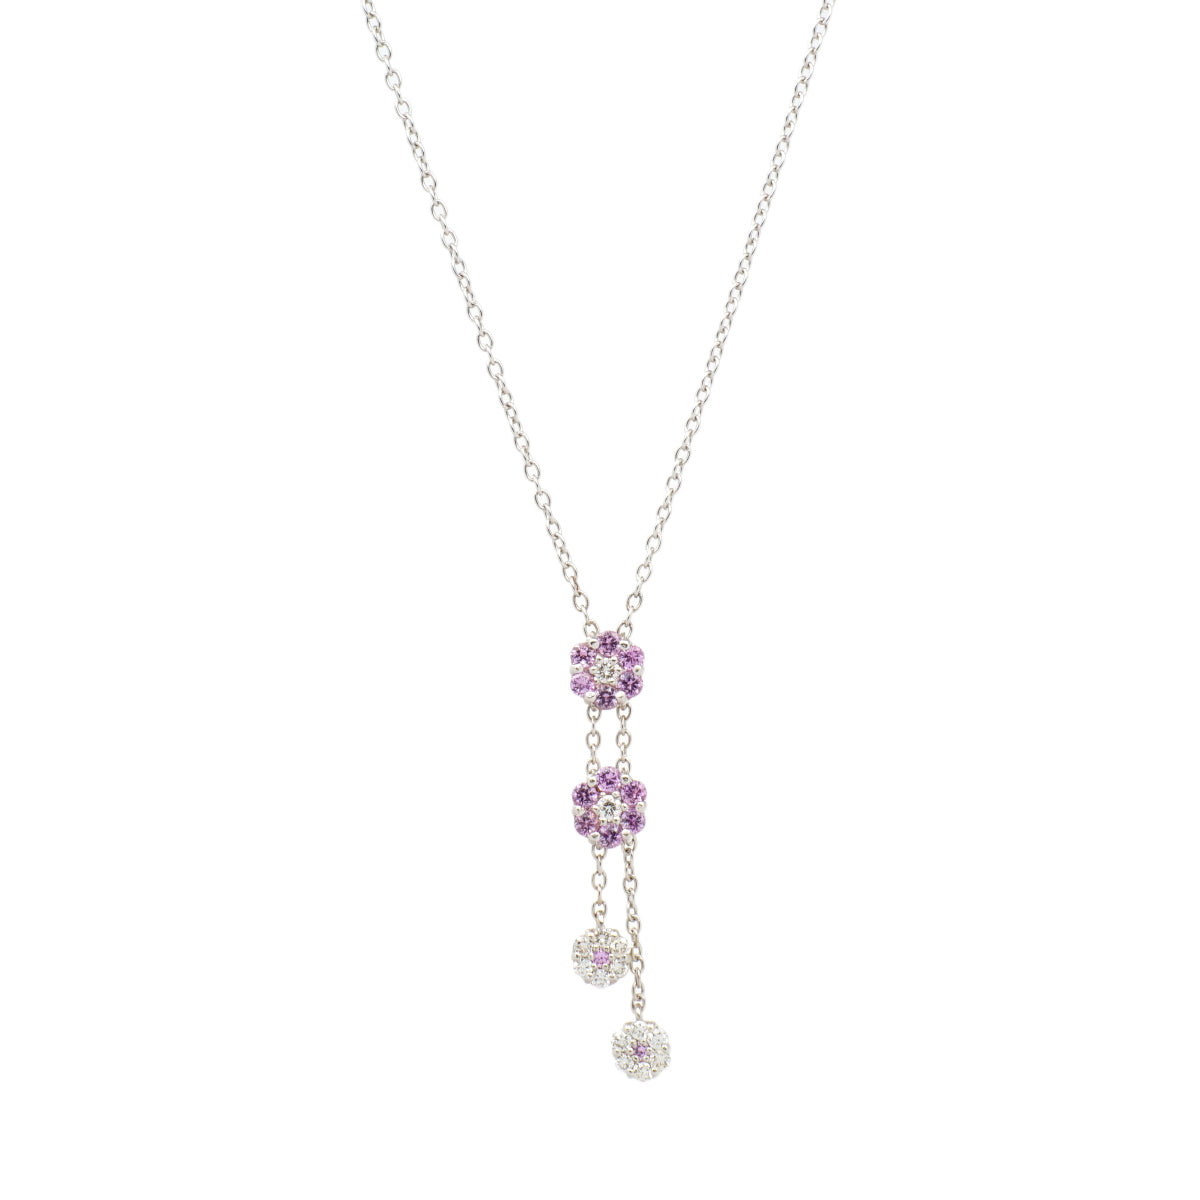 [LuxUness]  PonteVecchio Flower Motif Necklace with D0.14ct Diamonds and S0.28ct Sapphire in K18 White Gold - Diamond x Pink Sapphire, Ladies, Ponte Vecchio [Preloved] J1954 in Excellent condition